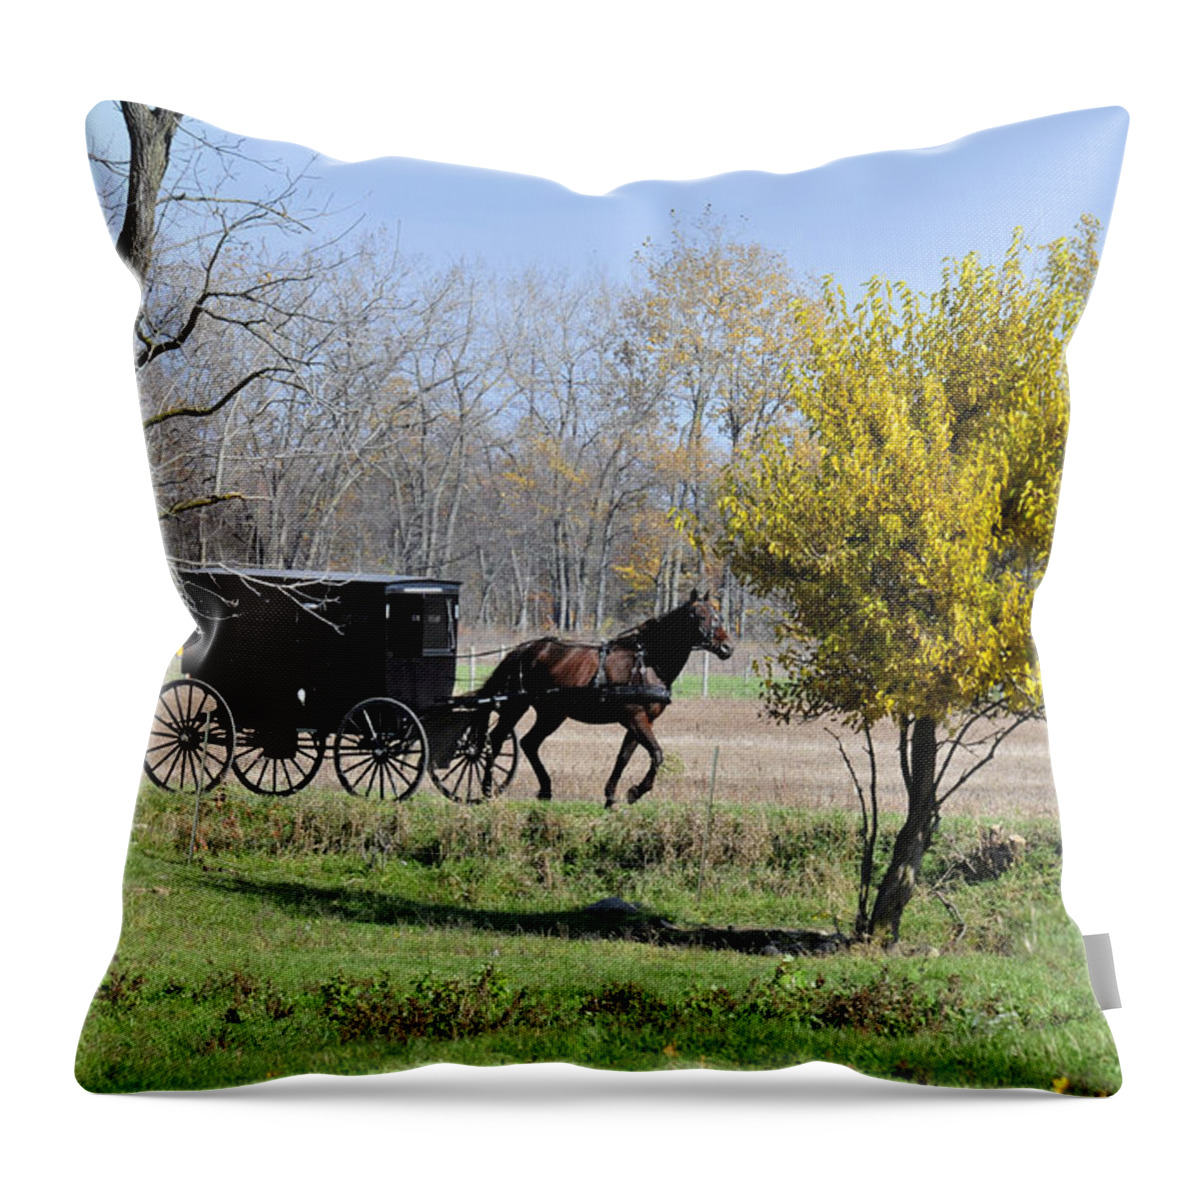 Amish Throw Pillow featuring the photograph Amish Buggy Late Fall #1 by David Arment